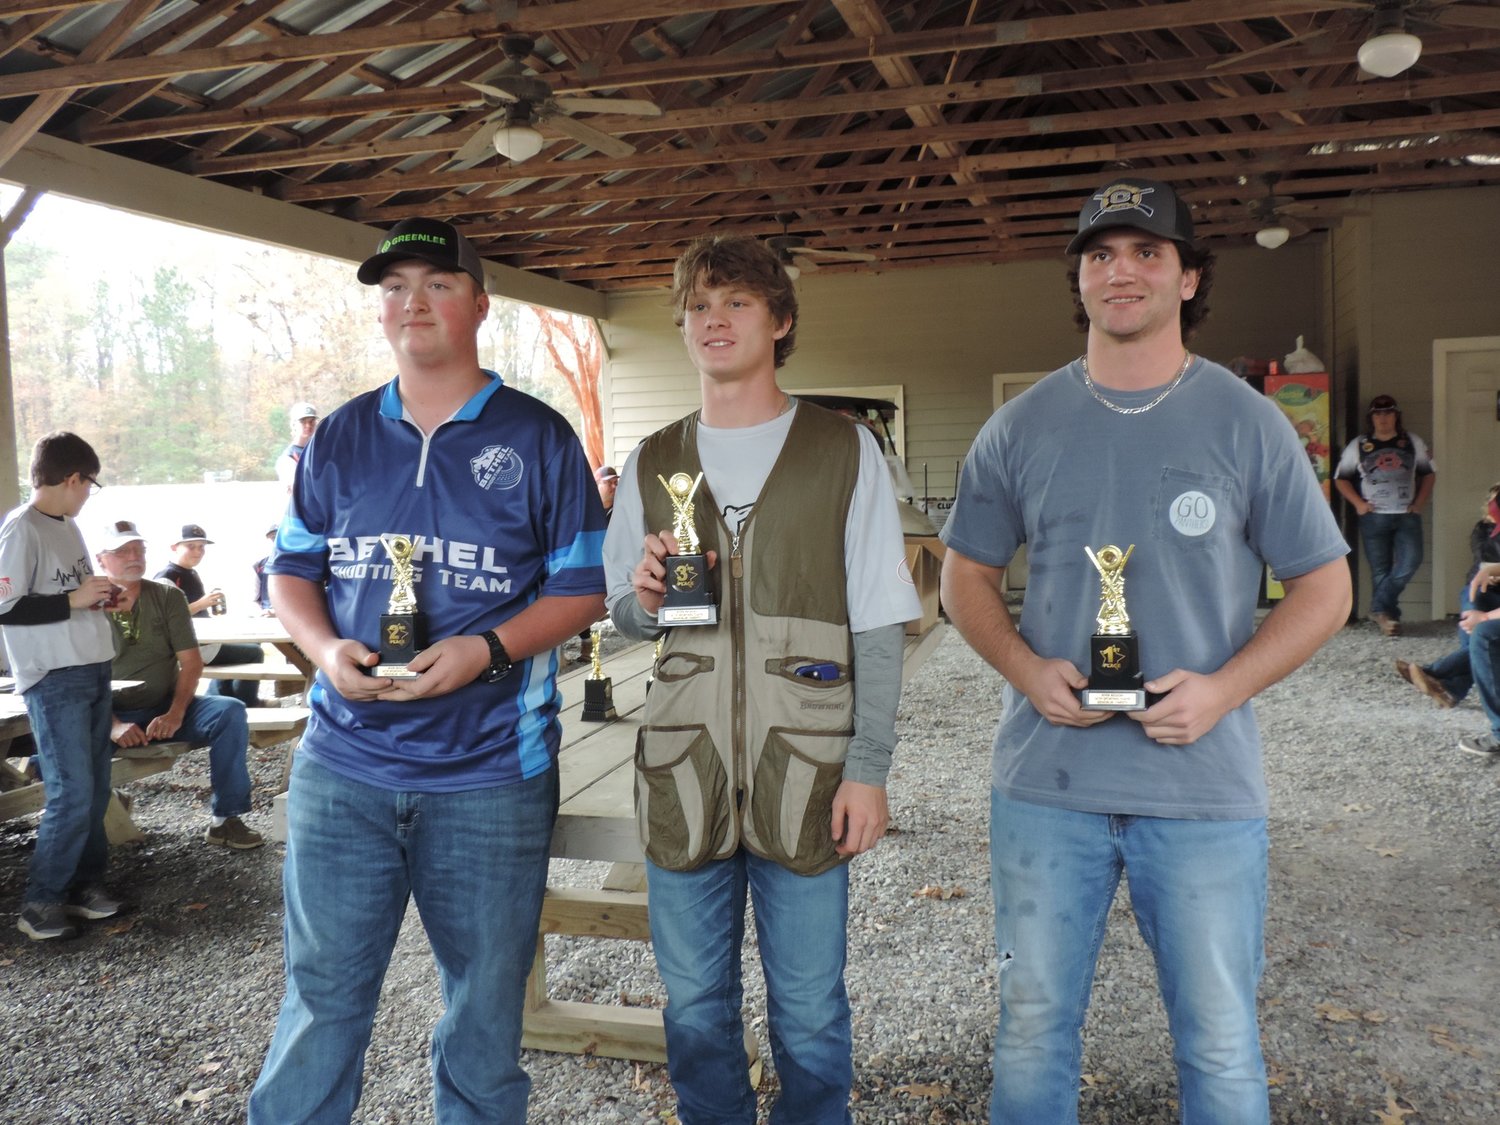 Trey Crosby, right, from Baldwin County finished third in the Senior/Junior Varsity division of the 2022 River Region Fall Sporting Clay Shoot at Lower Wetumpka Shotgun Sports Club Saturday, Dec. 3. He was joined by Cullman’s Mac Hurst in first place and BCA’s Levi Chambers in second place.